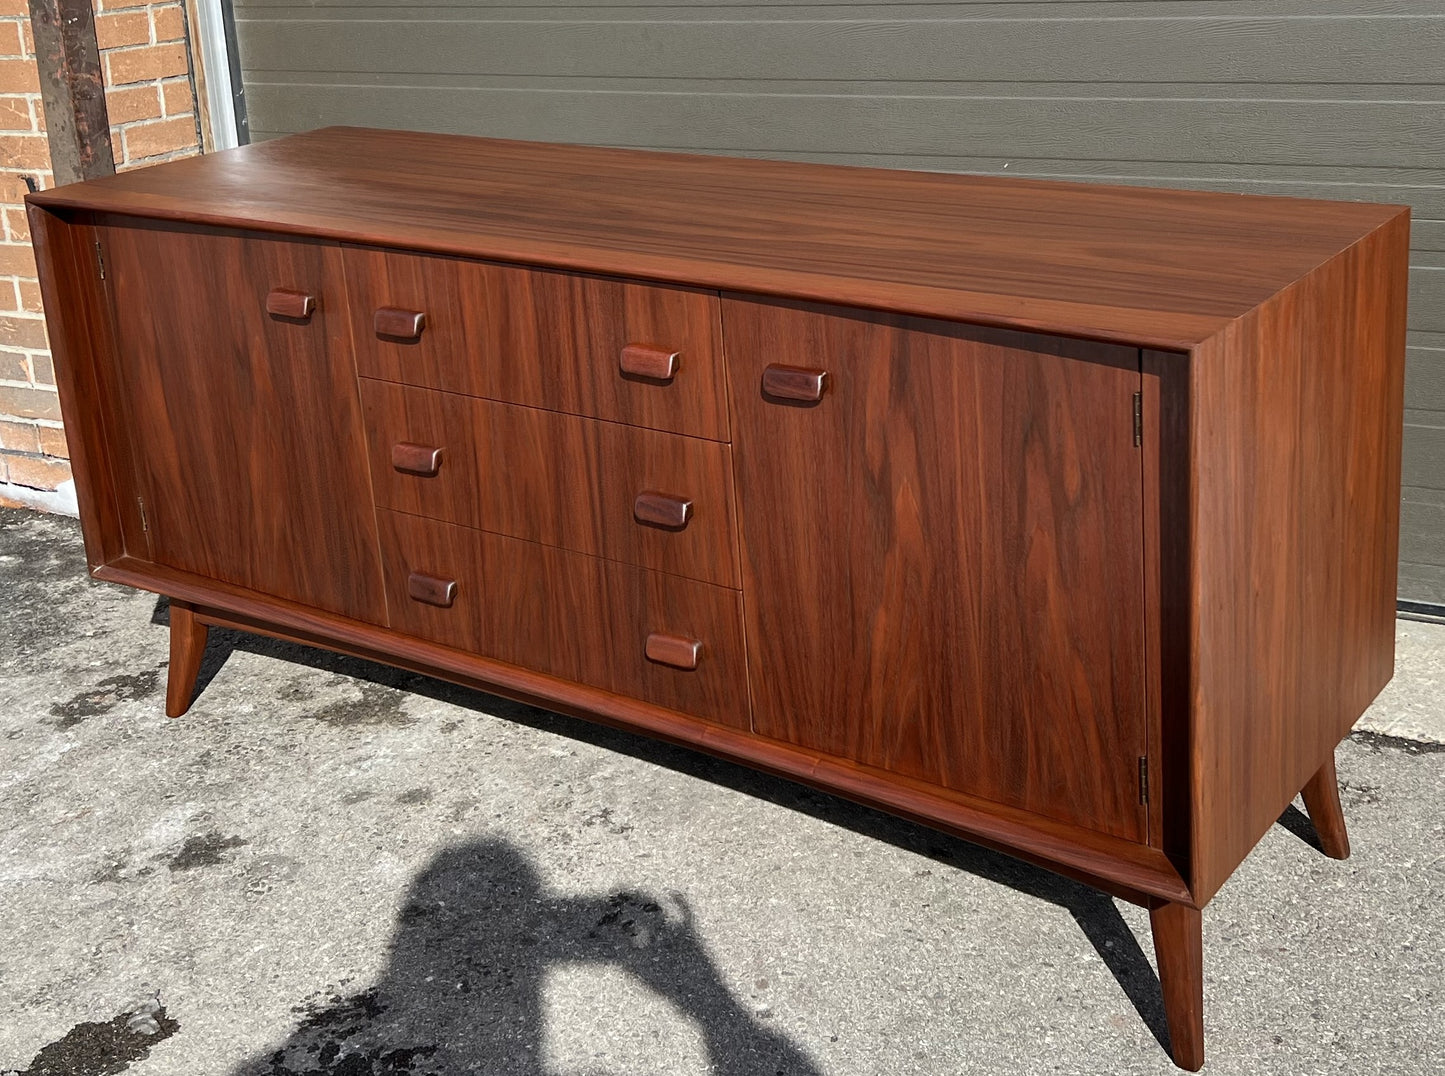 REFINISHED Mid Century Modern Walnut Sideboard by Russell Spanner, 68"